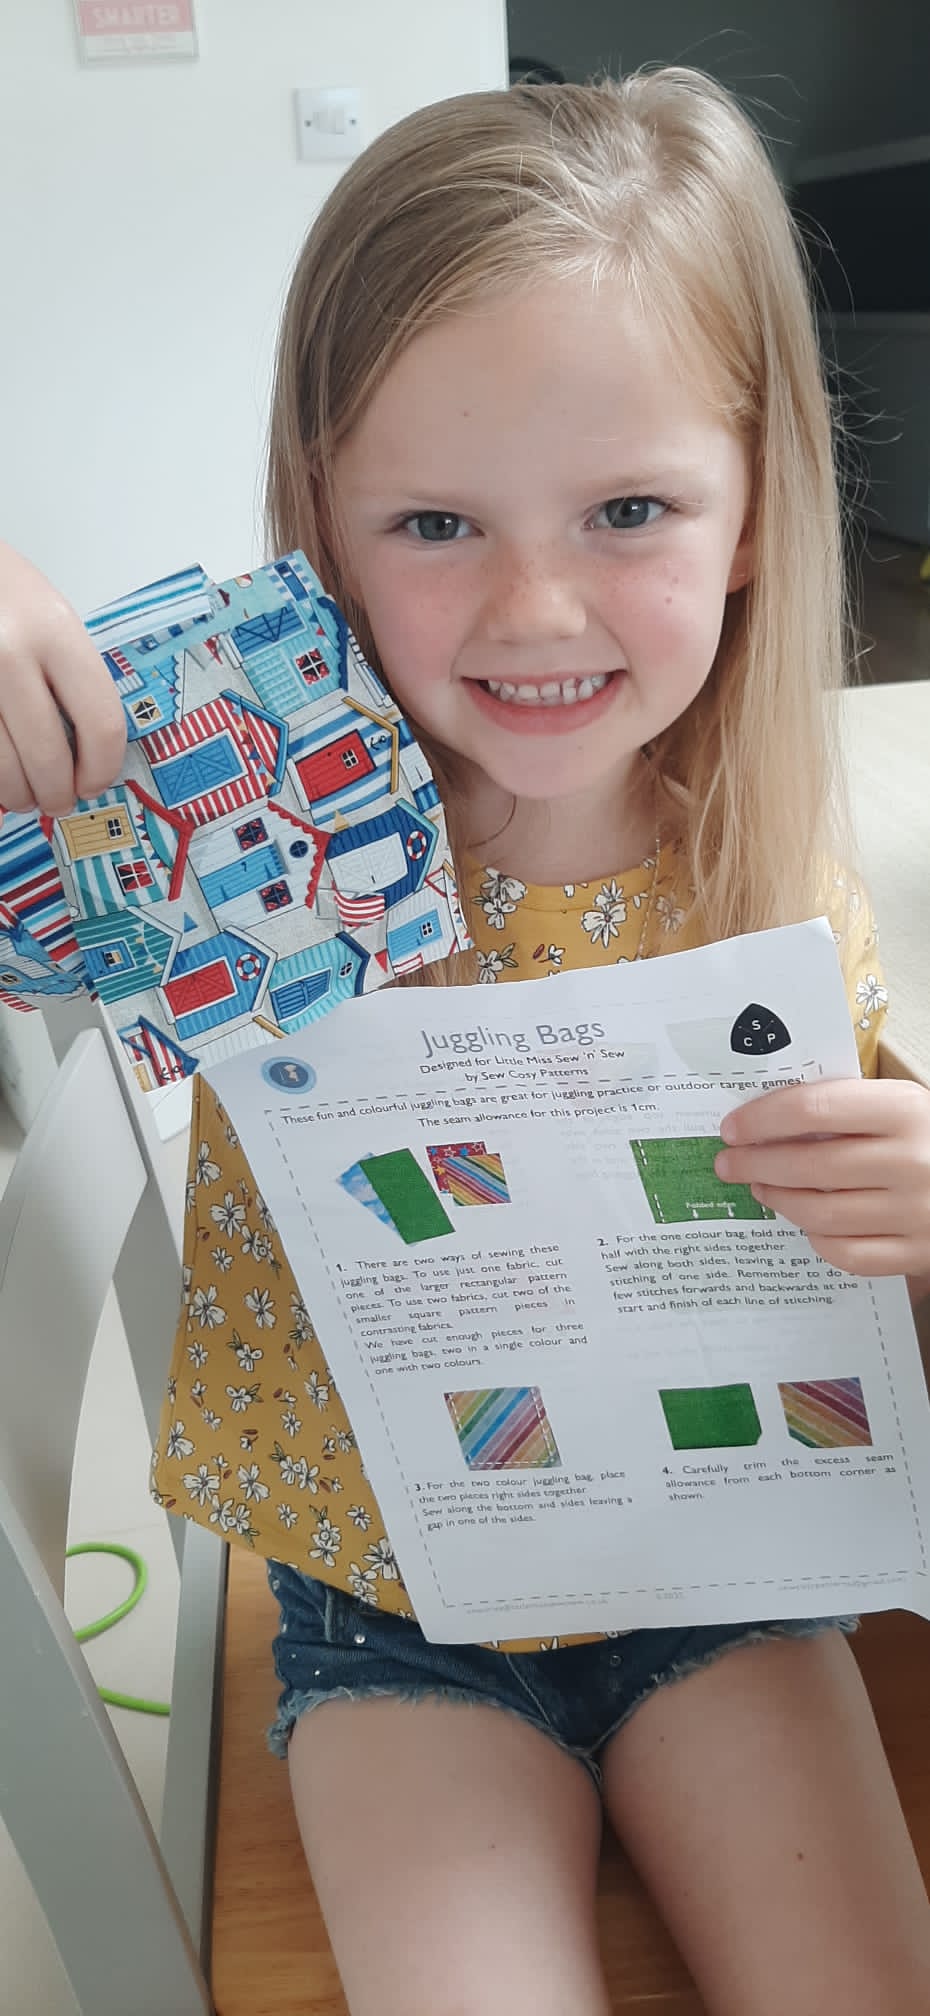 The Kids Sew Too Club by Lois